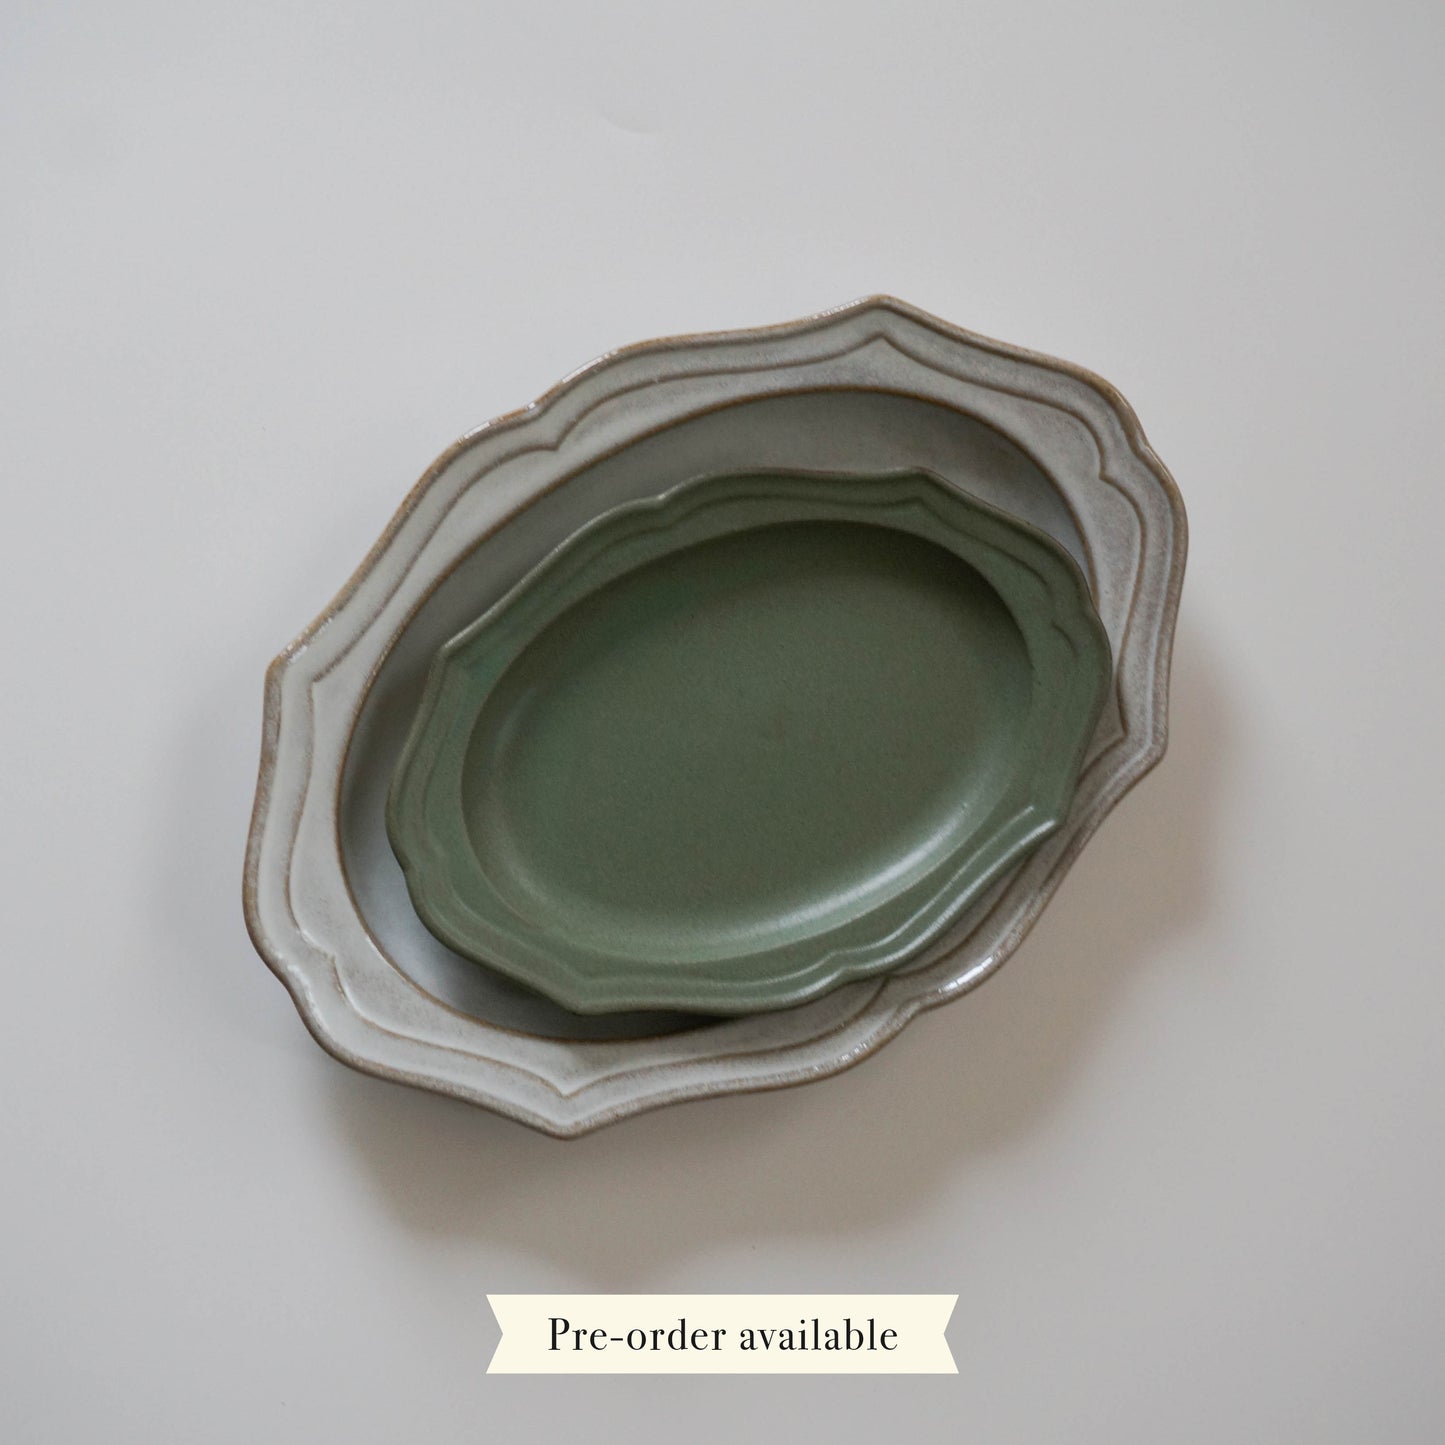 Oval Plate - Cardle Series